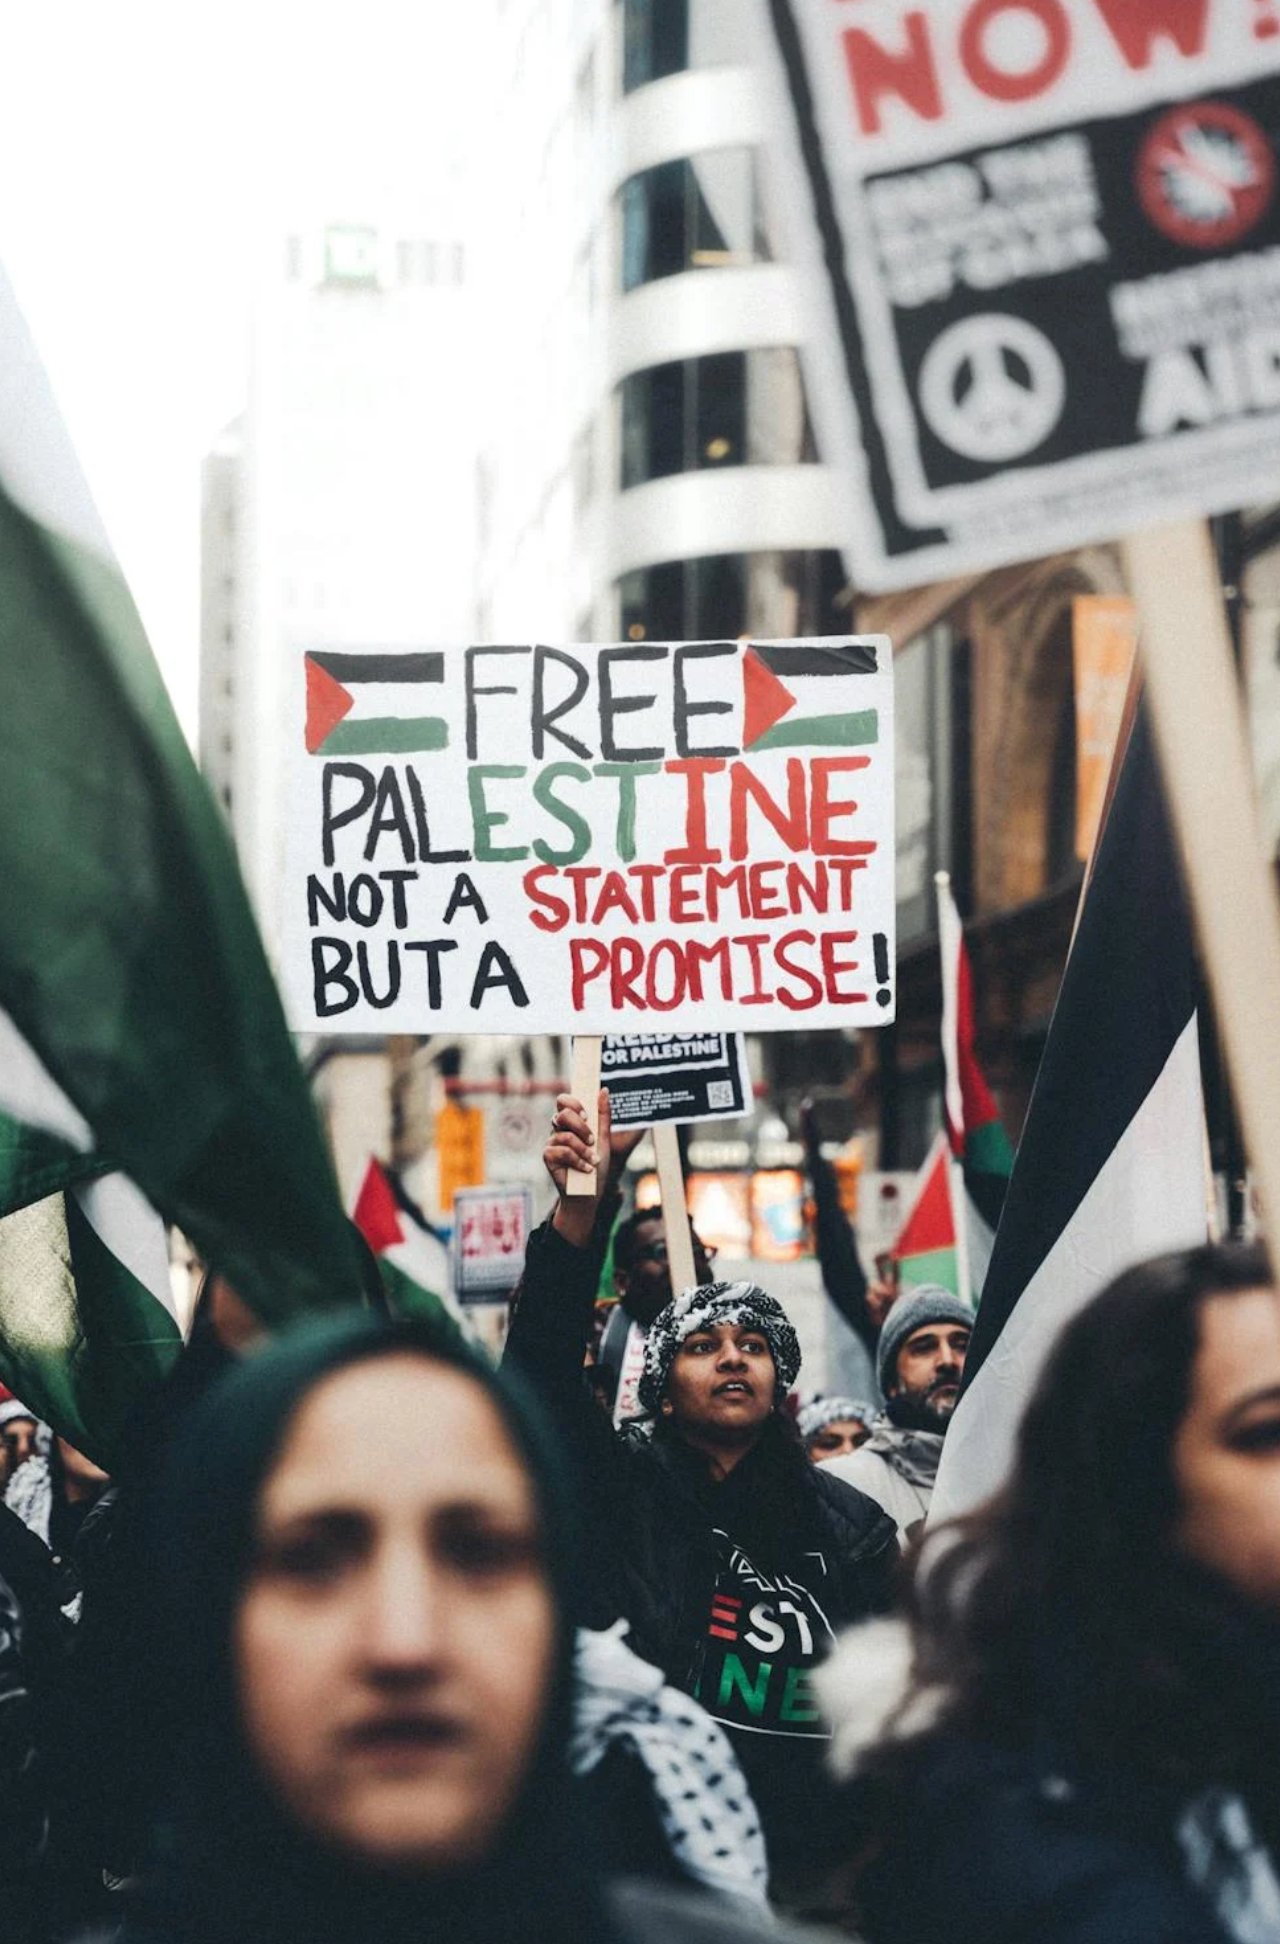  Free Palestine is not a statement but a promise  